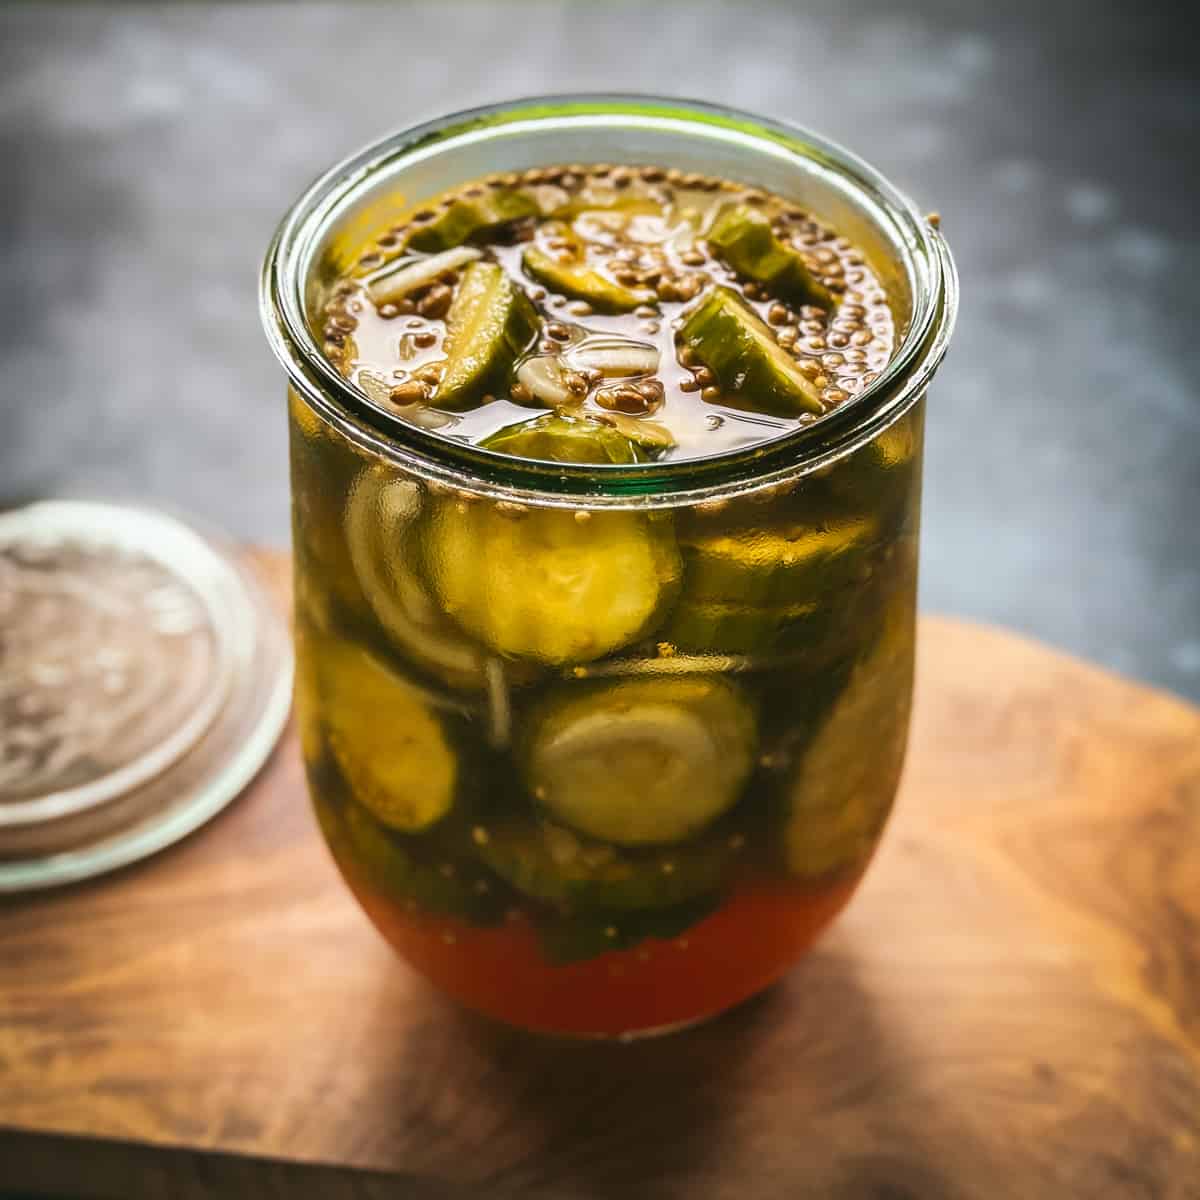 Bread and butter pickles in an open jar, on a wooden cutting board with a gray background.